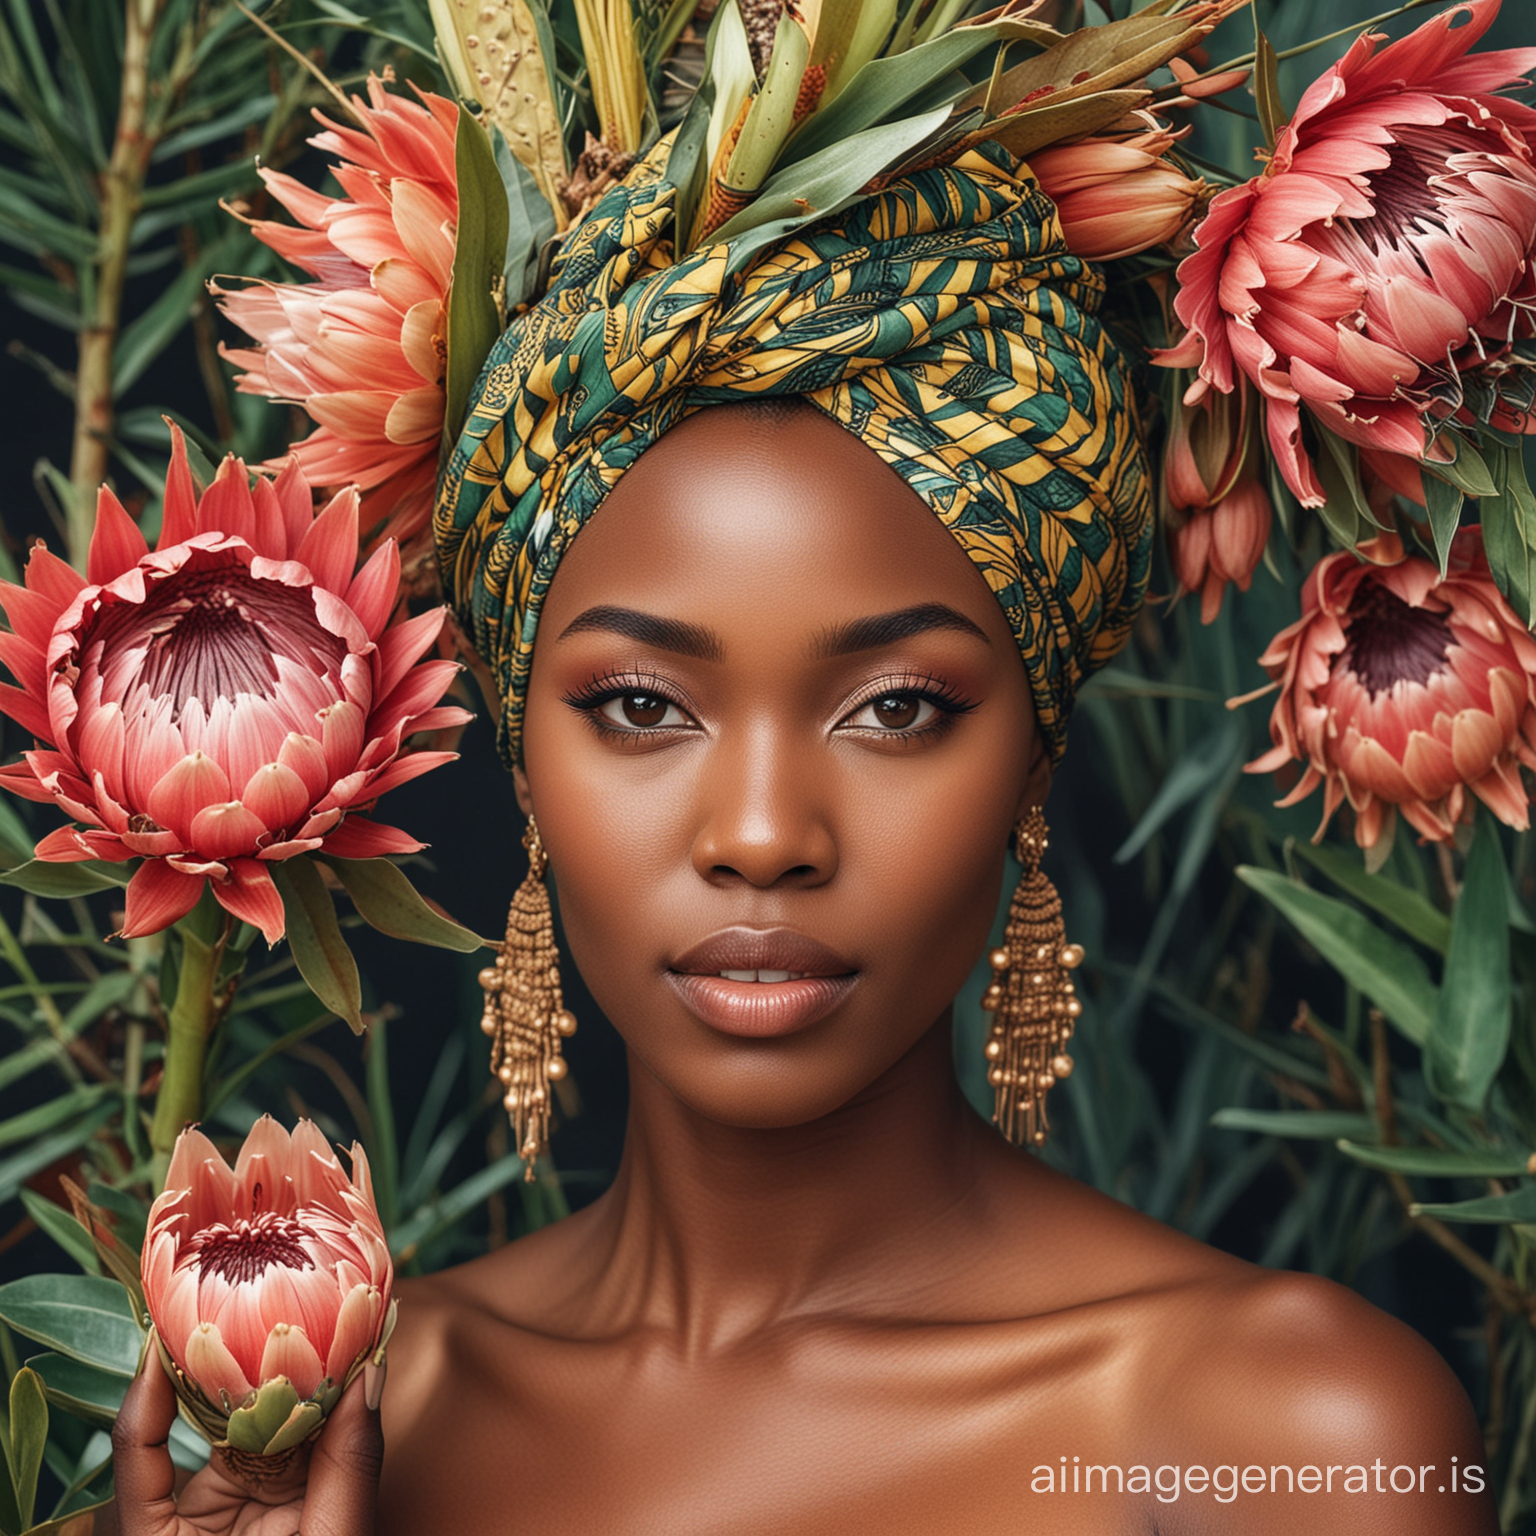 a closeup portrait of a beautiful african women who looks like a goddess with a headwrap and is surrounded with proteas


